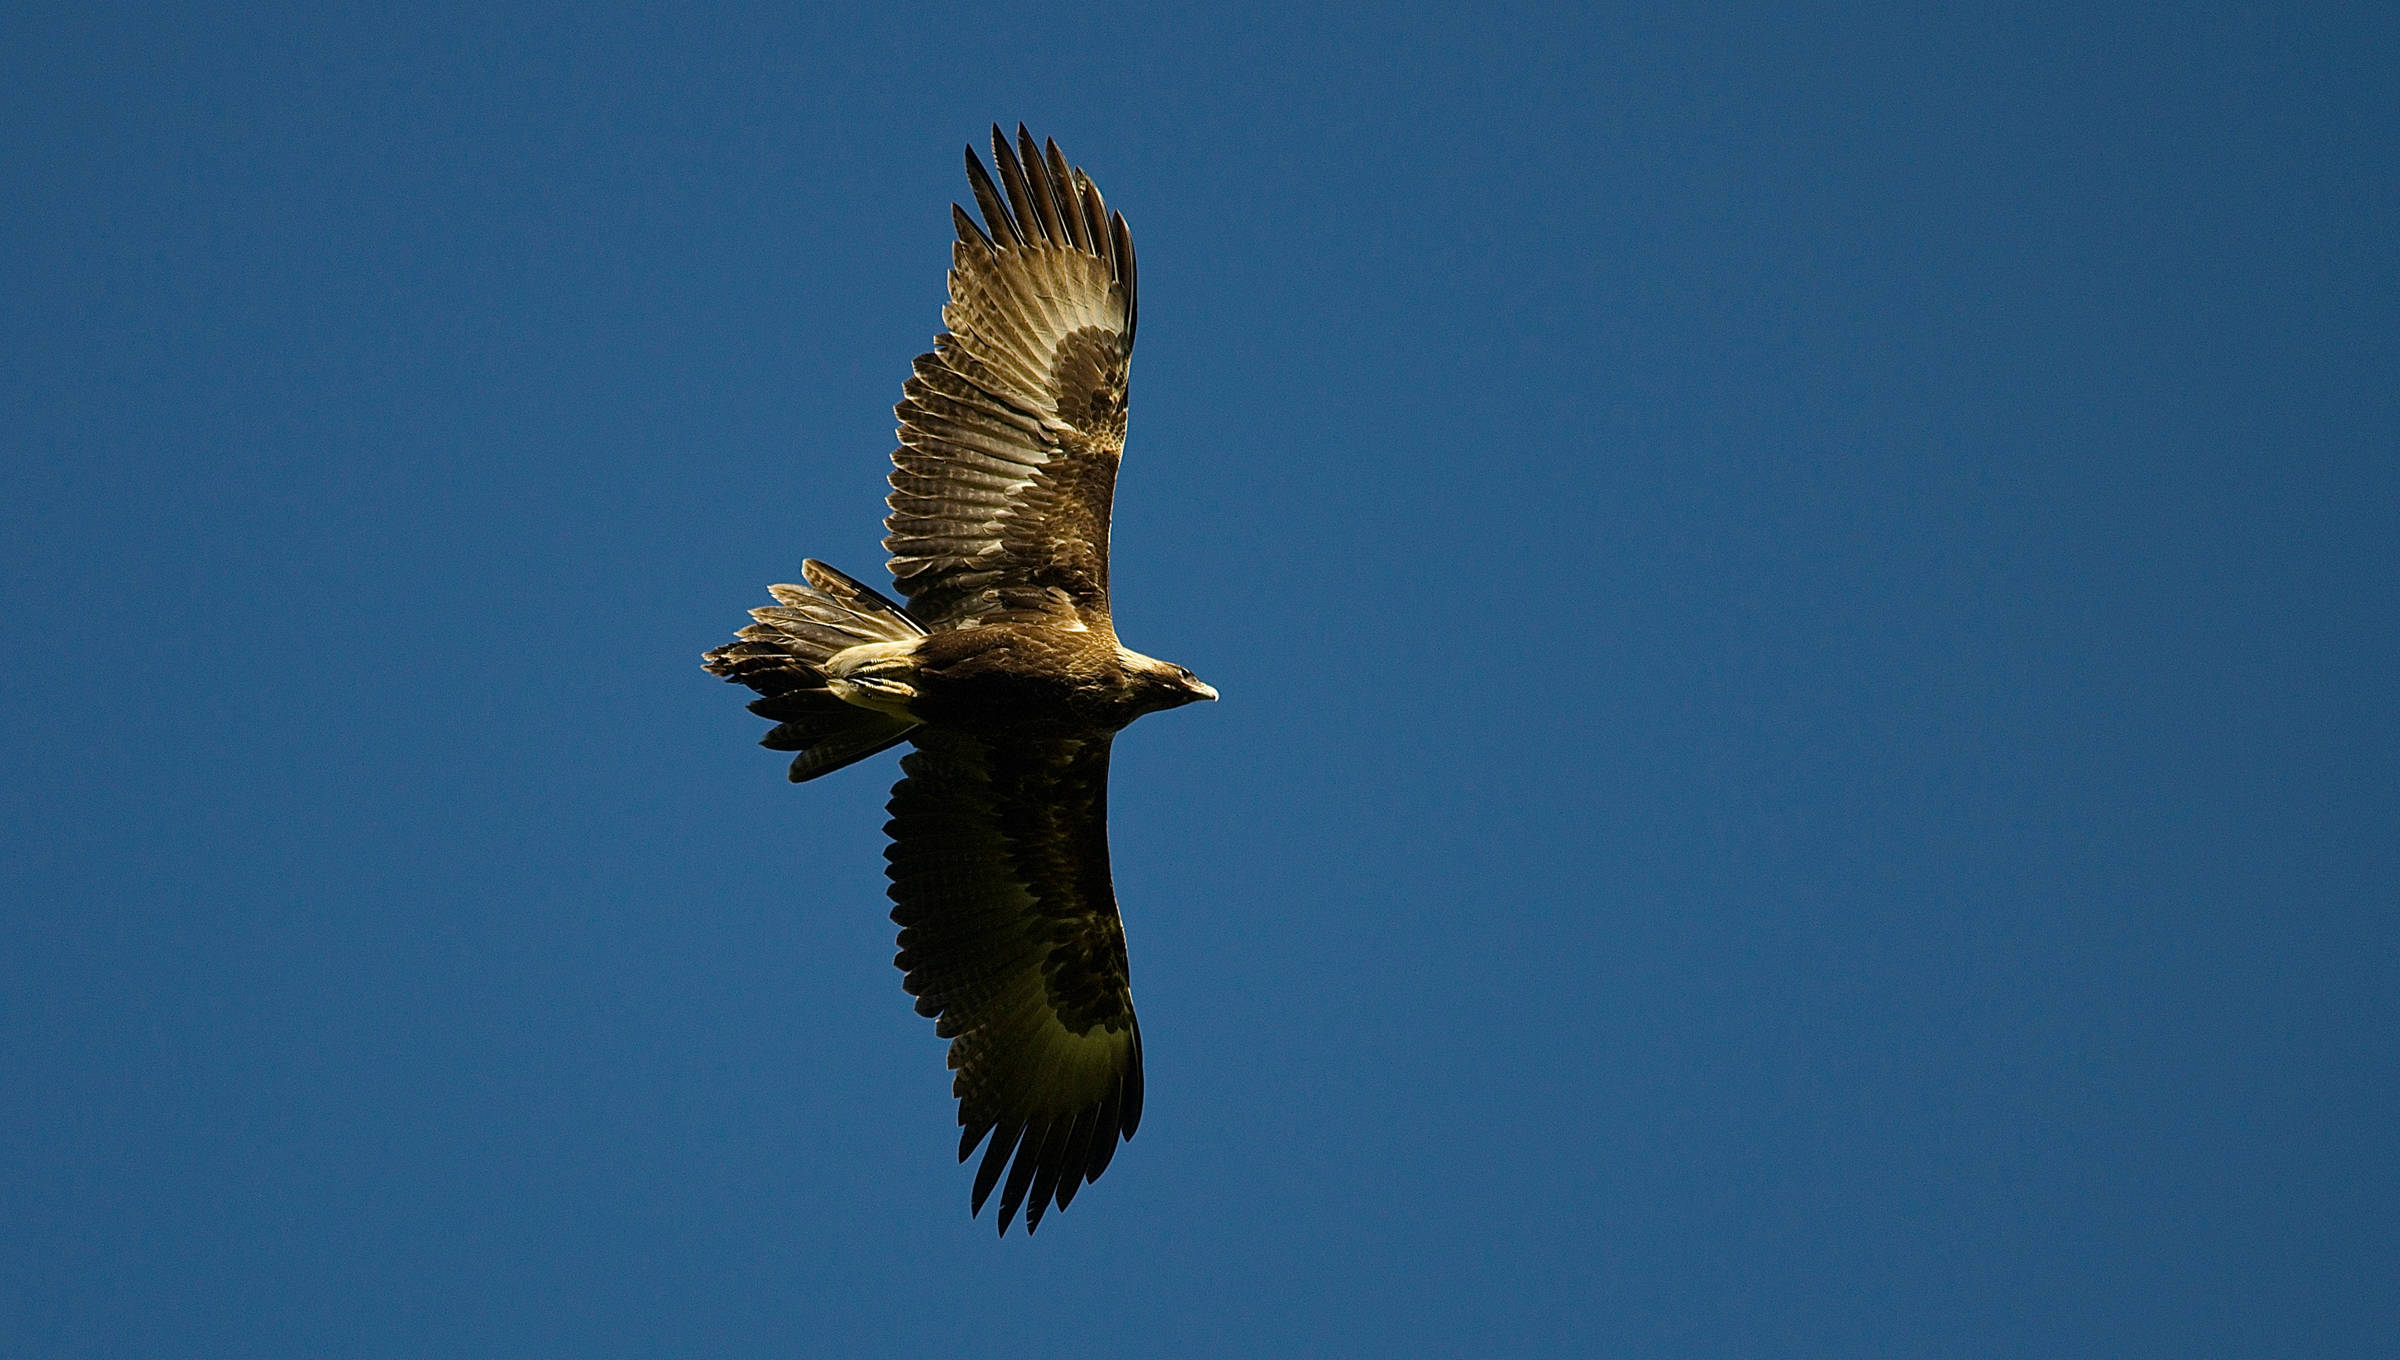 Flying wedge-tailed eagle, against a blue sky. Photo: Peter Vaughan.